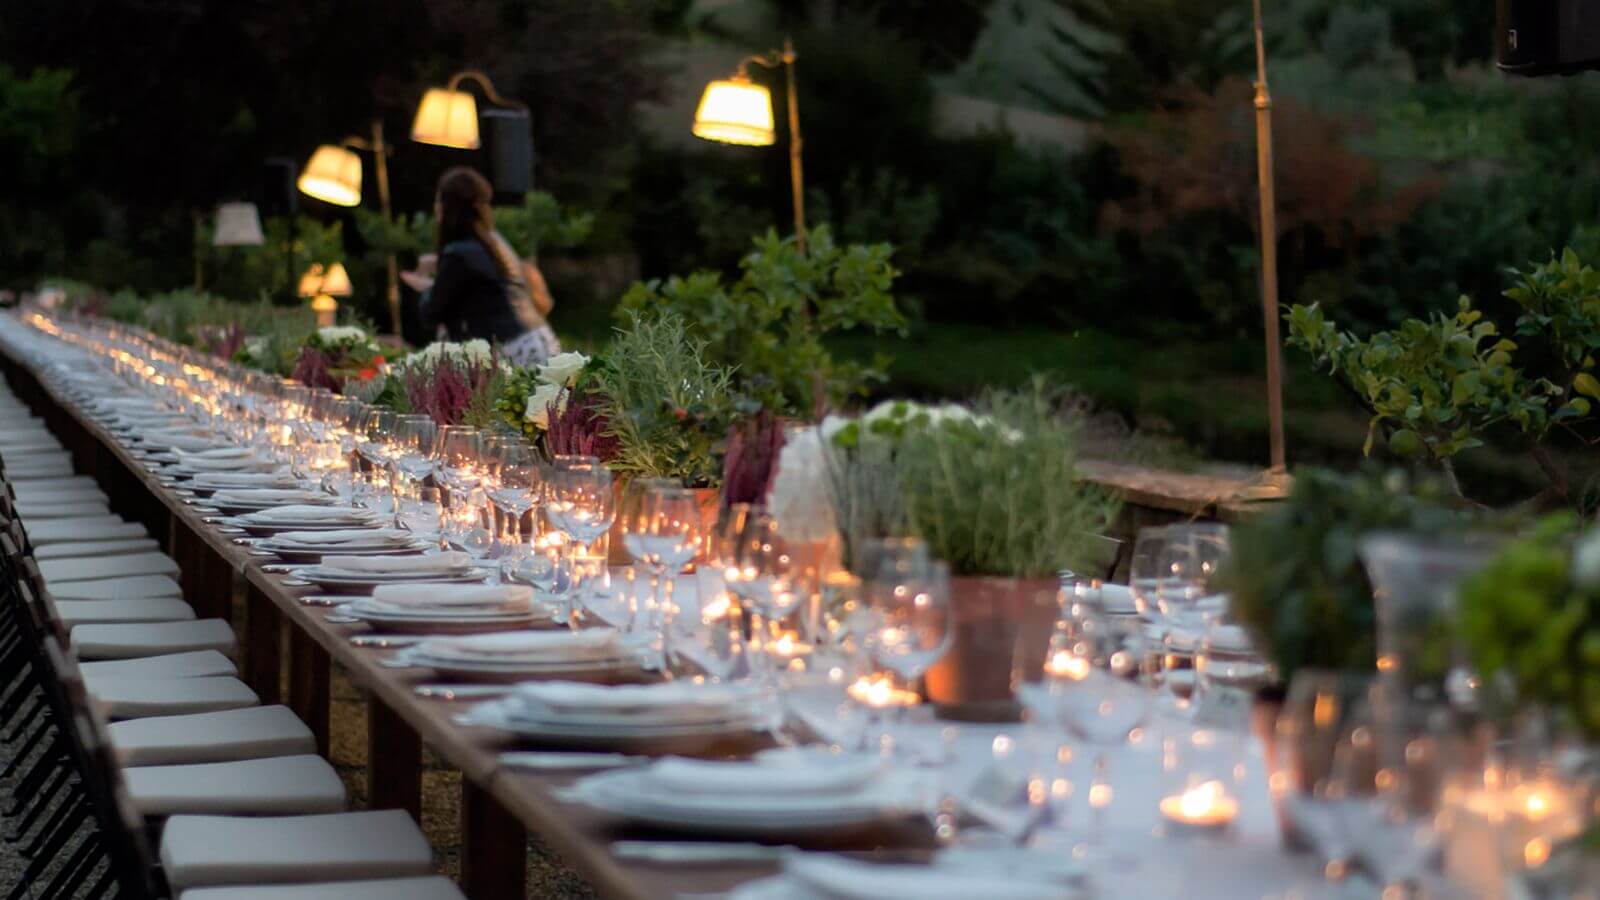 The Curated Life - Outdoor Wedding Reception givy small.jpg